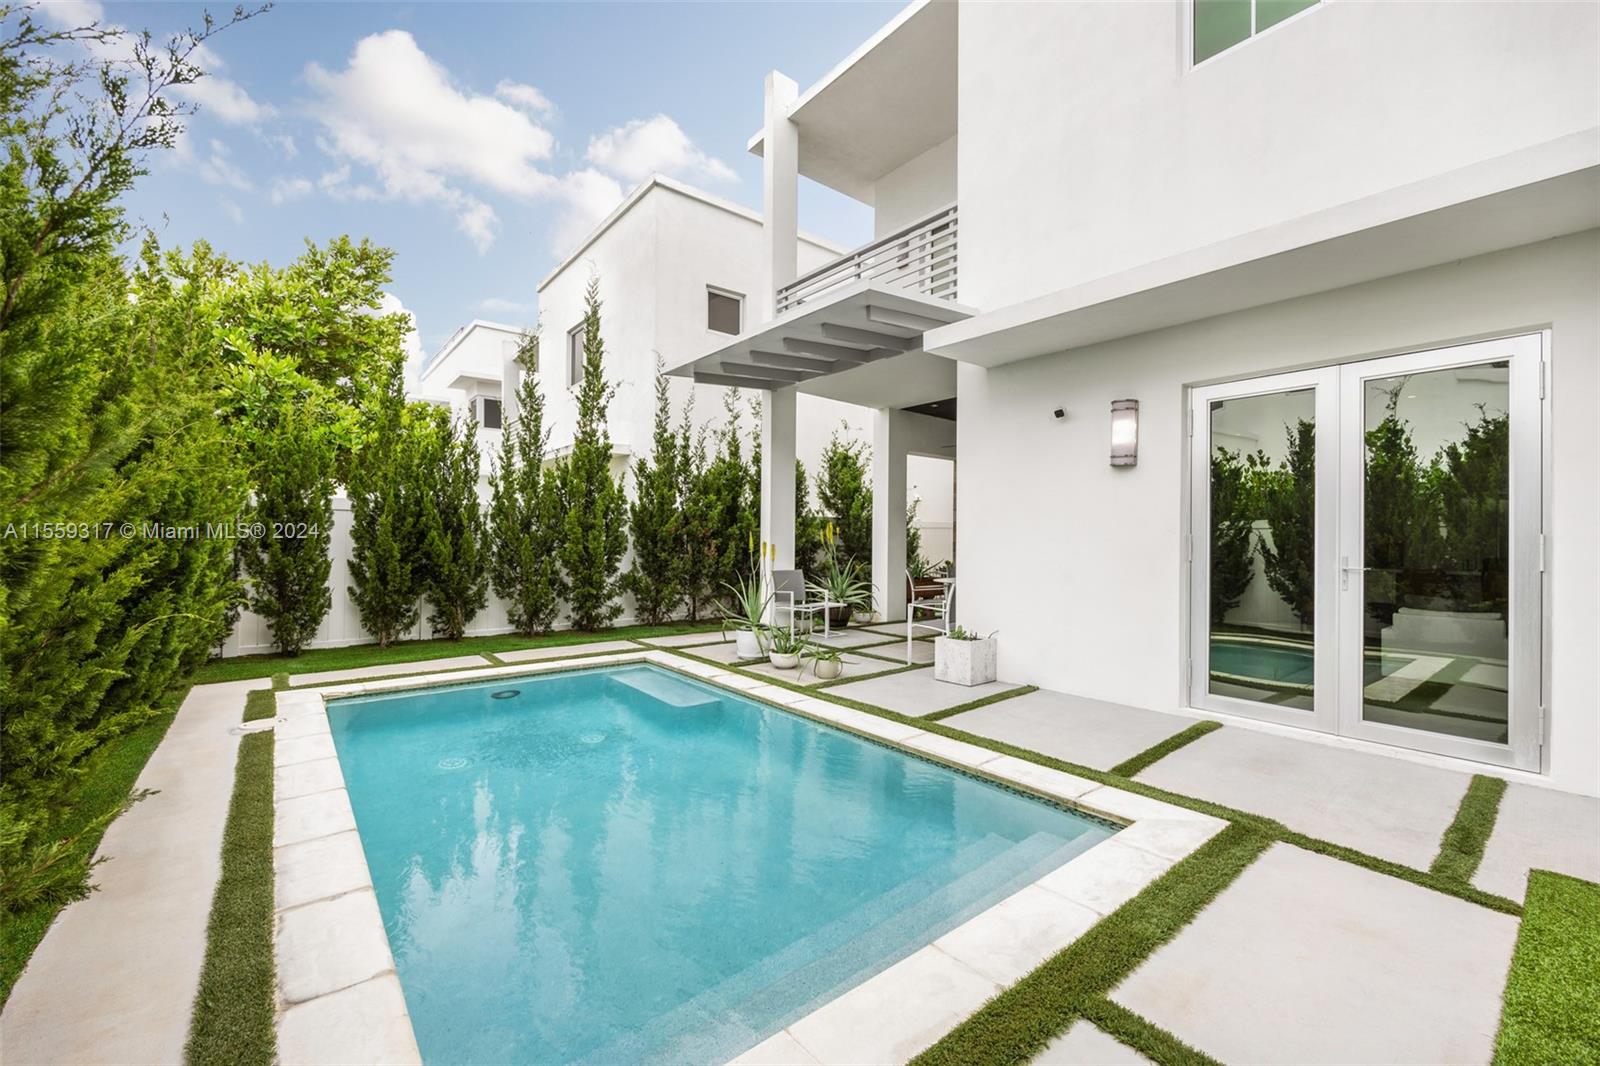 House for Sale in Doral, FL